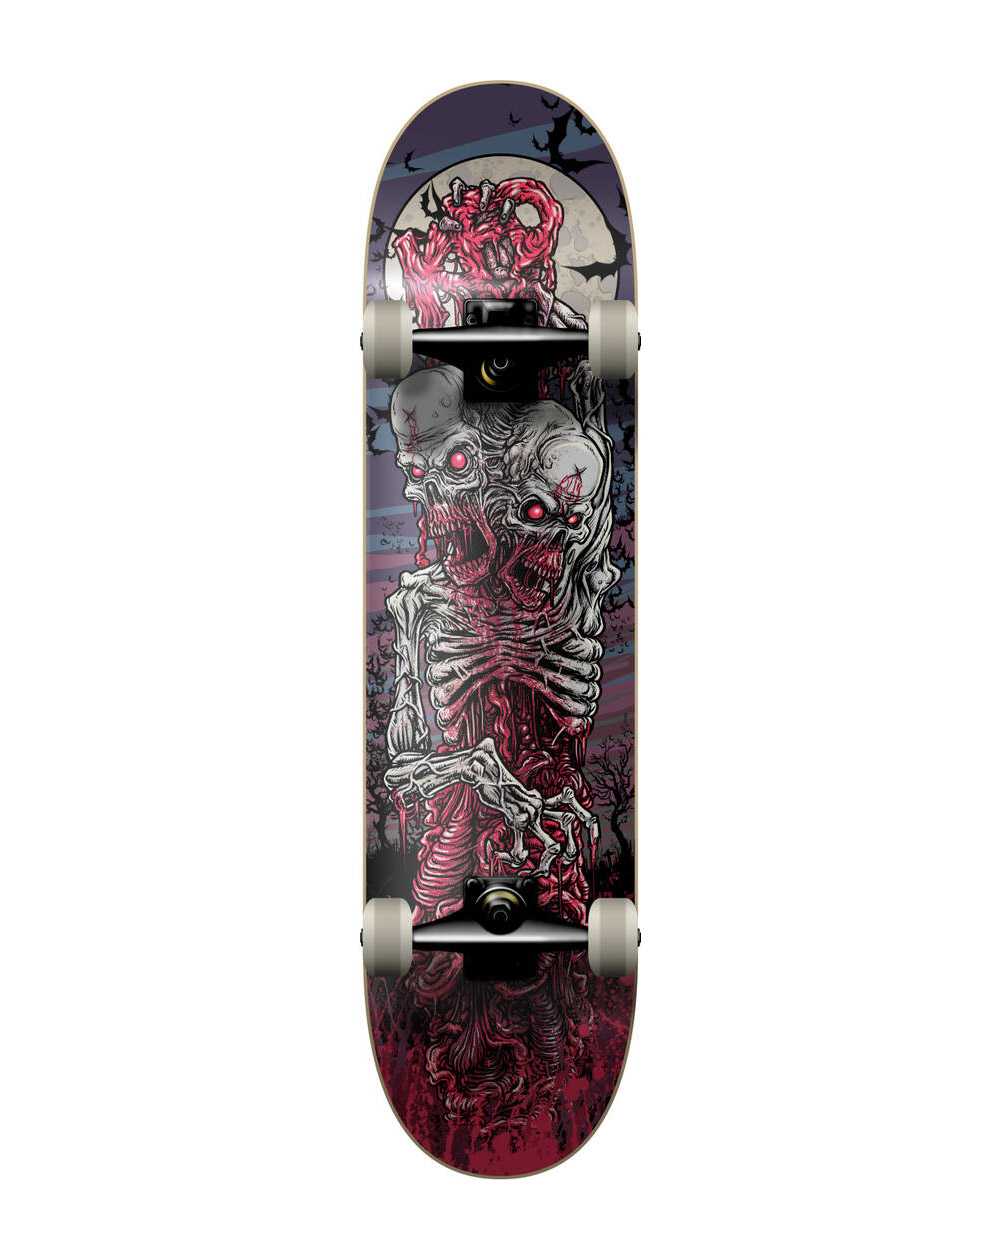 KFD Young Gunz 7.75" Complete Skateboard Two Headed Zombie